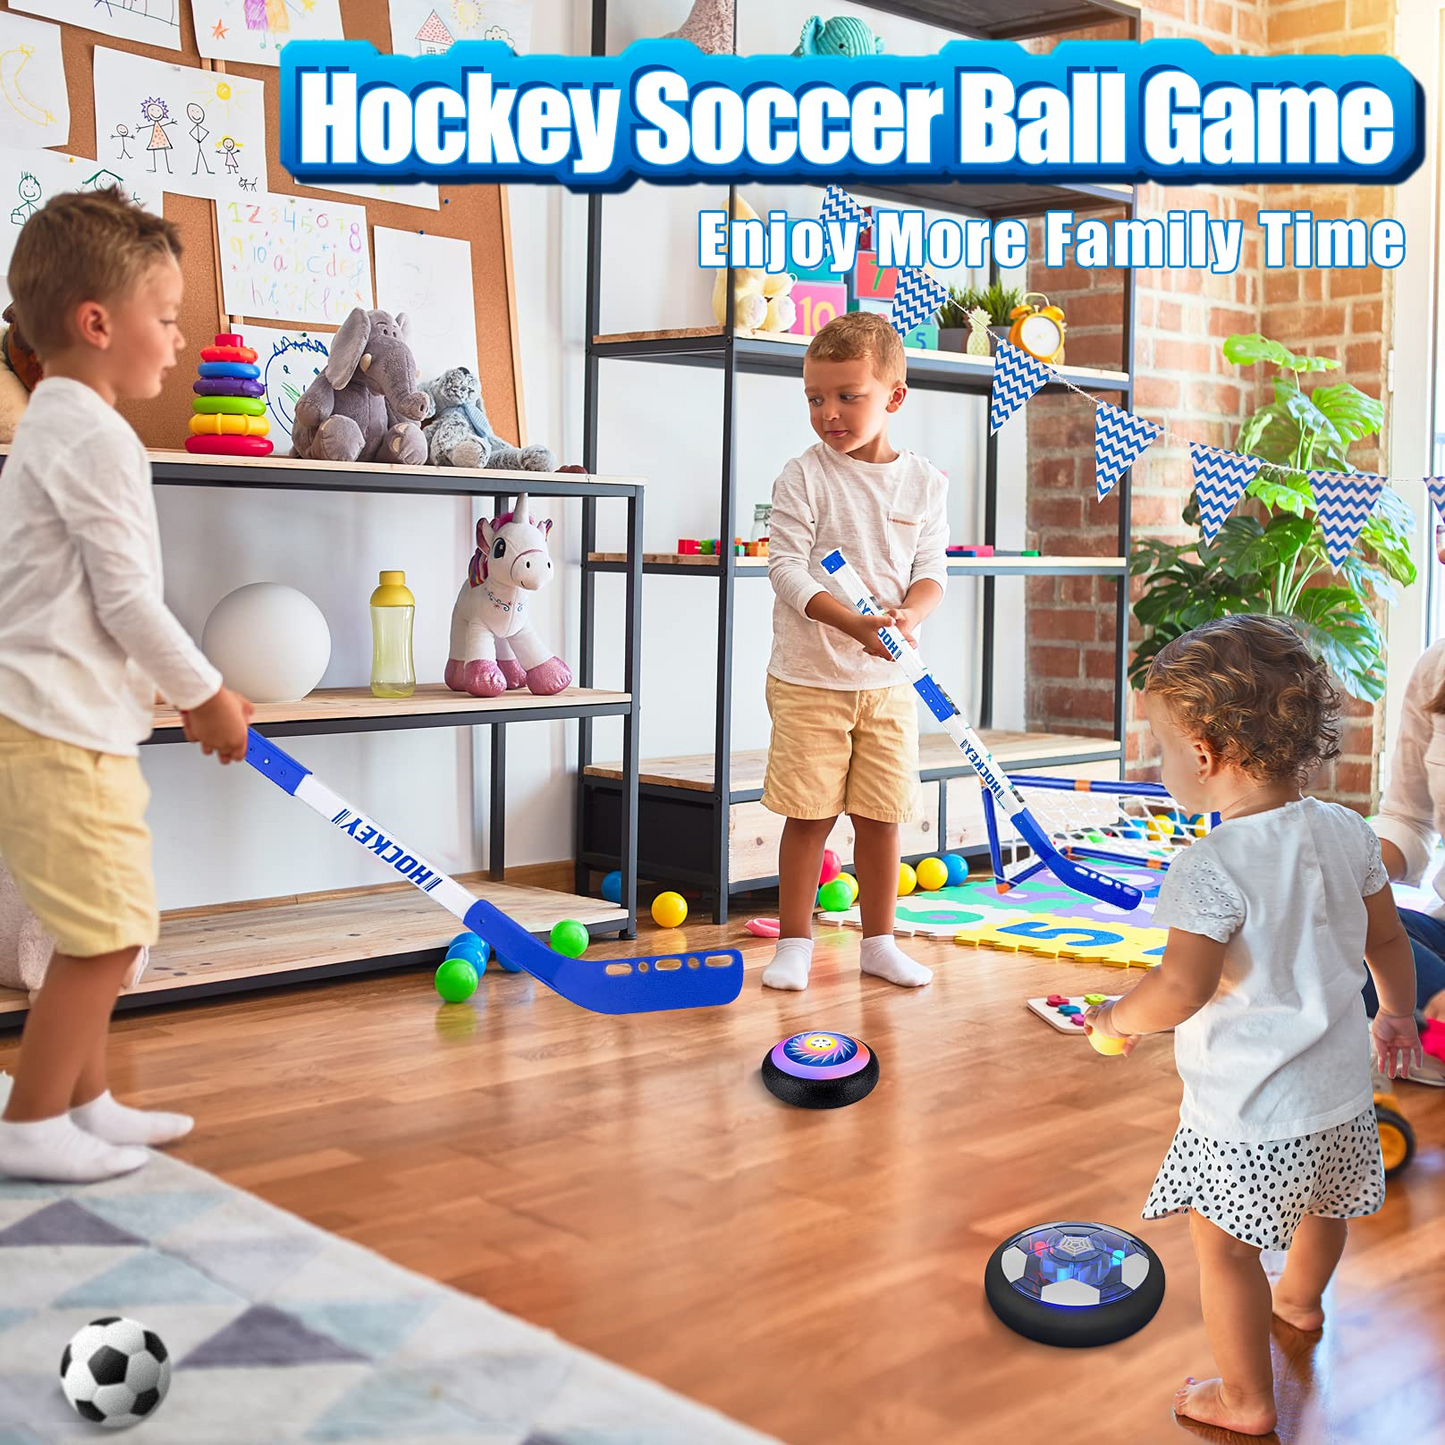 Hover Soccer Hockey Ball Set, 2 in 1 LED Rechargeable Soccer with 2 Goals Indoor/Outdoor Games Toys for Kids Boys Girls Ages 3+